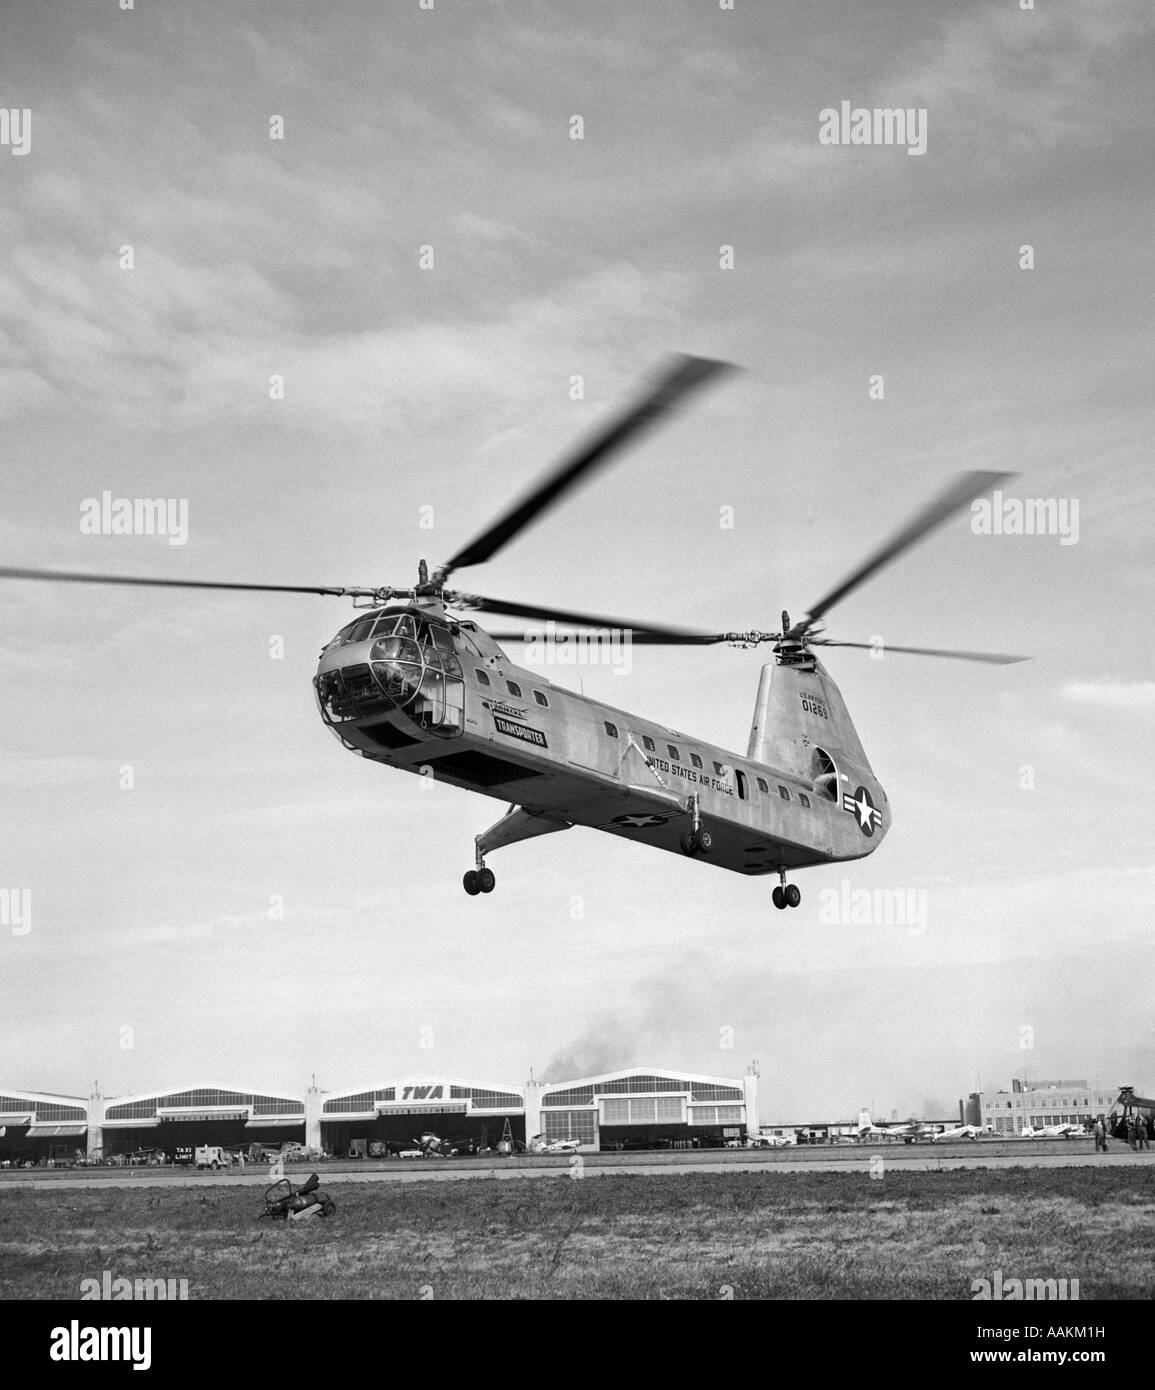 1950s AIR FORCE HELICOPTER TAKING OFF FROM BASE Stock Photo